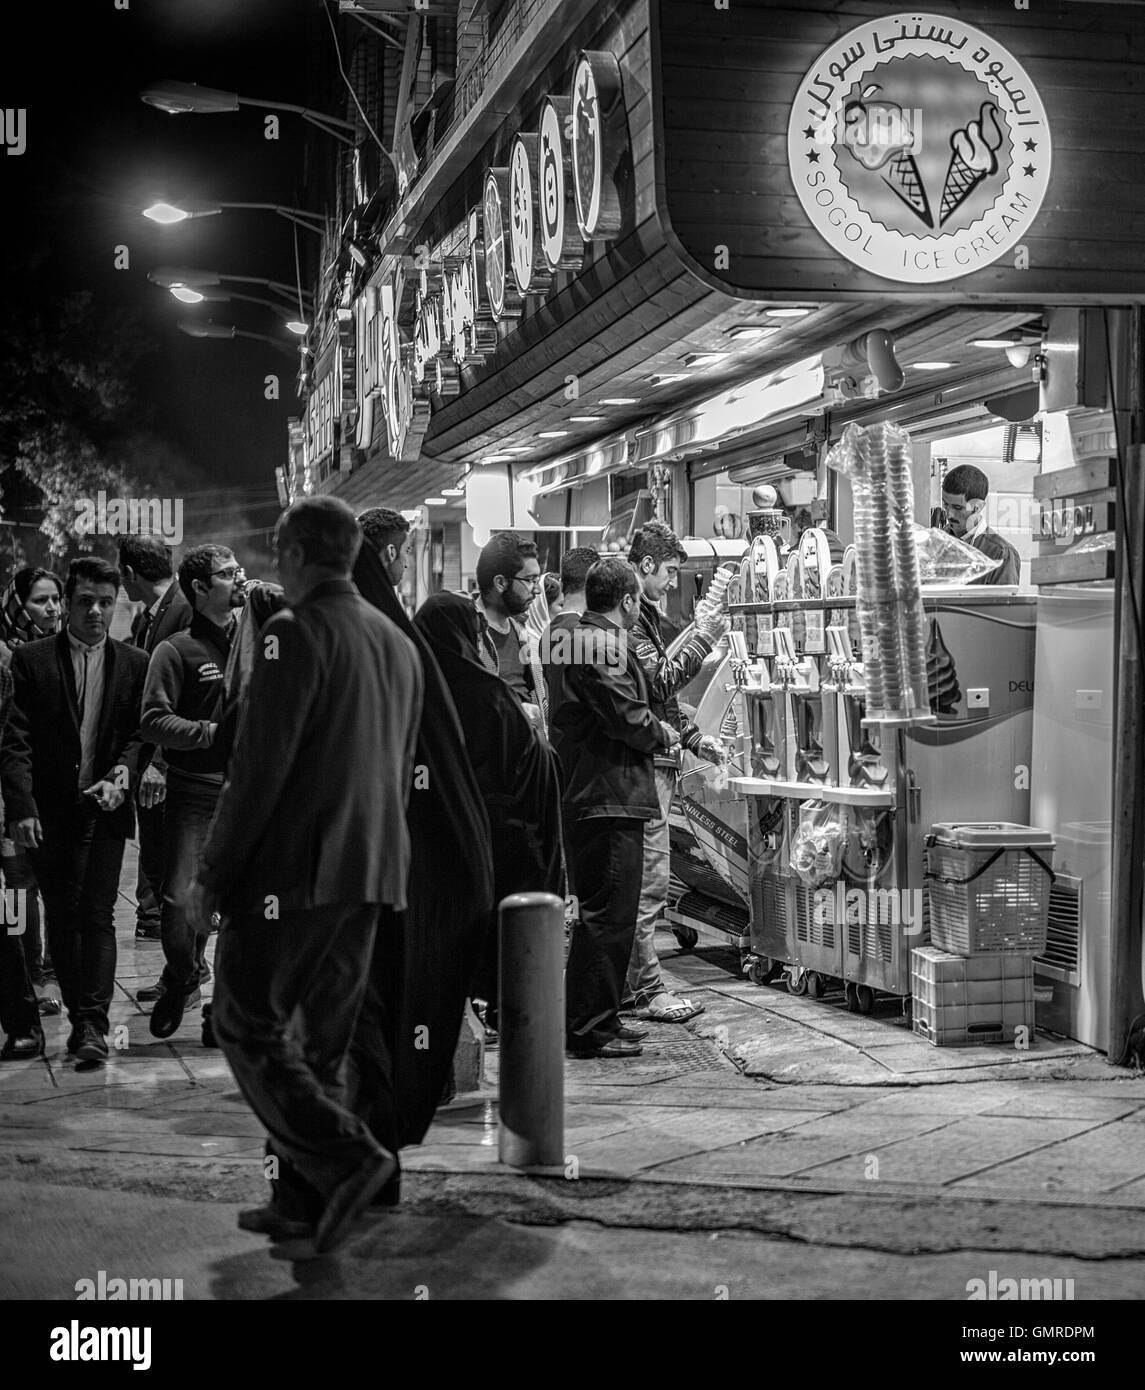 Crowd waiting to buy ice cream on the street at night in Isfahan, Iran. Stock Photo